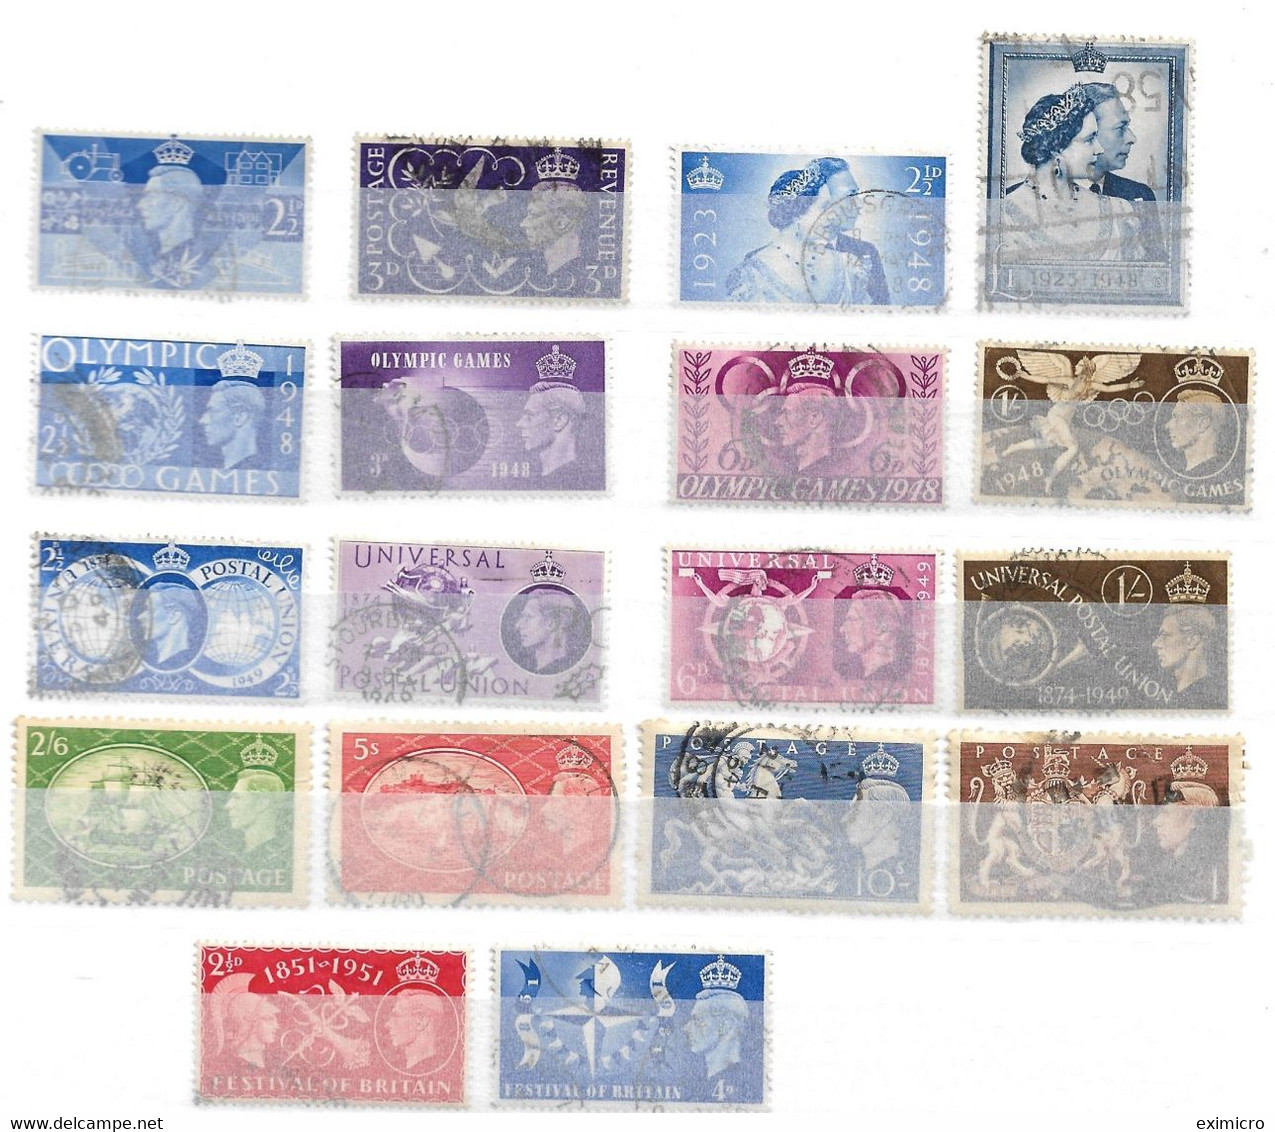 GREAT BRITAIN KING EDWARD VIII + GEORGE VI FINE USED COLLECTION OF SETS ON A DOUBLE-SIDED STOCK SHEET Cat £154+ - Collections